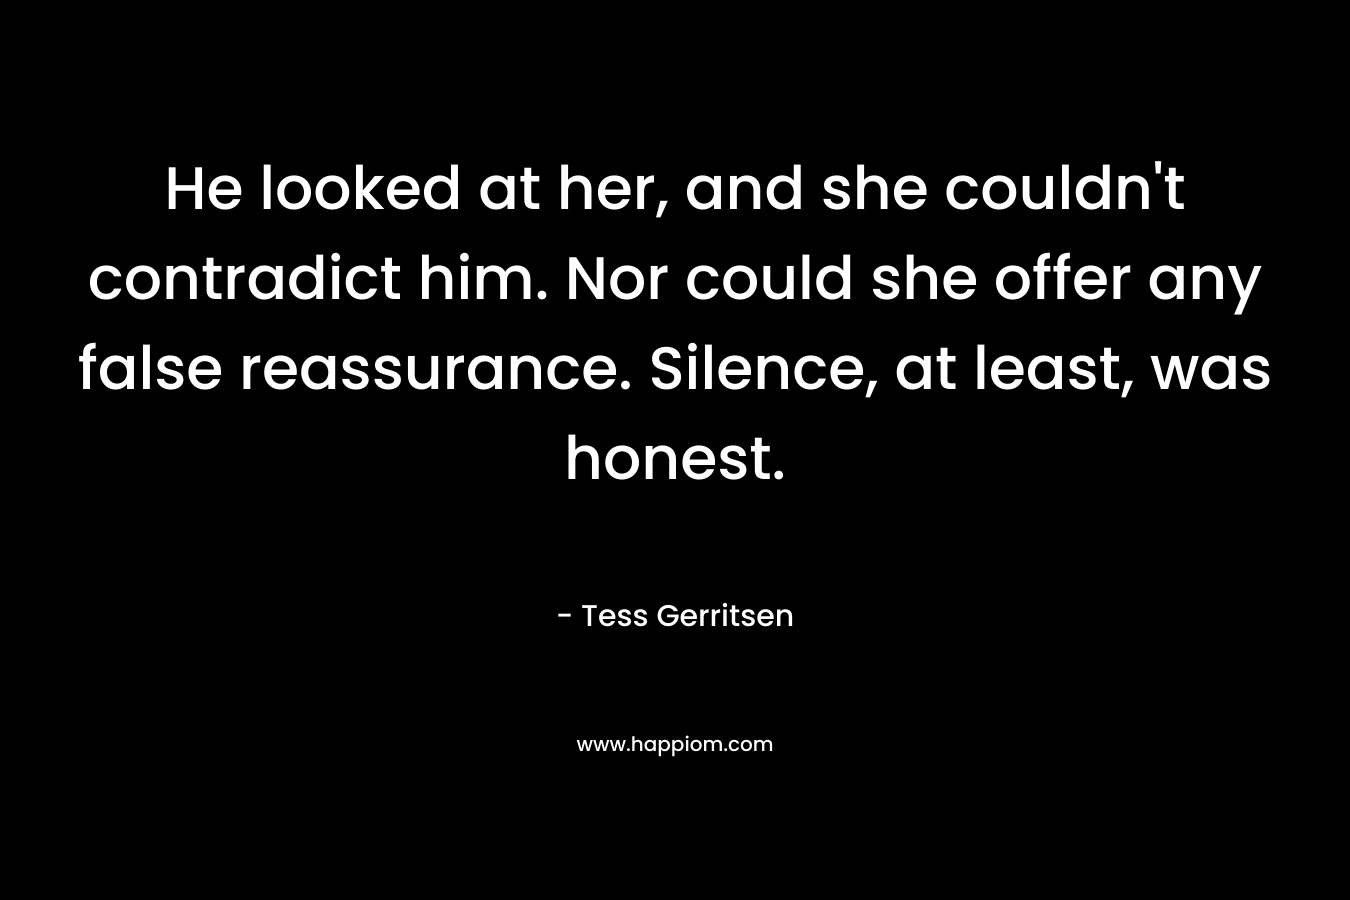 He looked at her, and she couldn’t contradict him. Nor could she offer any false reassurance. Silence, at least, was honest. – Tess Gerritsen